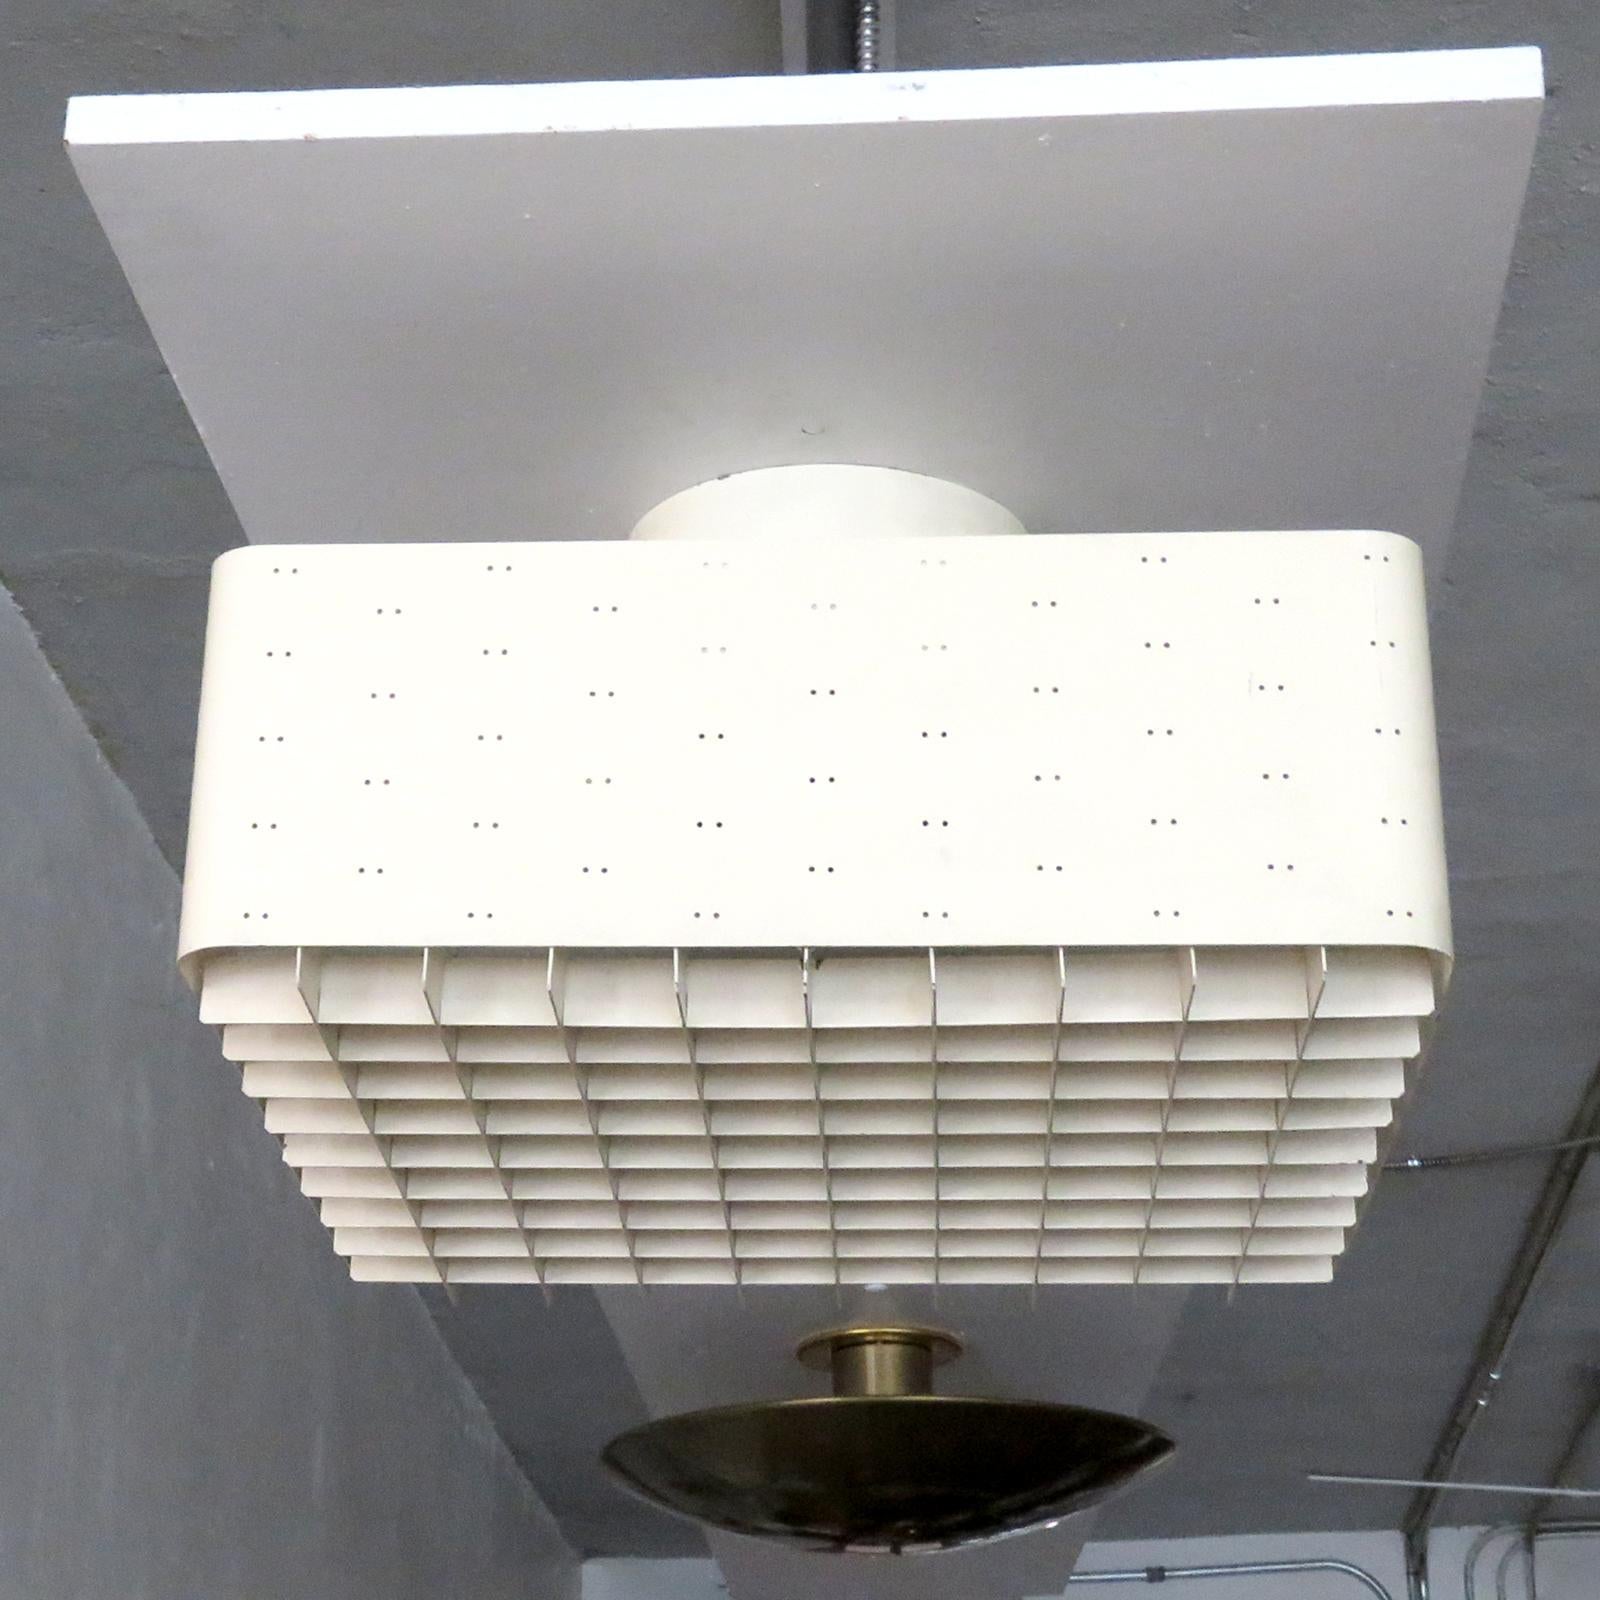 Stunning flush mount ceiling light, 'Starry Sky', Model 9068, by Paavo Tynell for Idman, Helsinki, Finland, circa 1955, in enameled, perforated metal with frosted glass diffuser, stamped with manufacturer's label, can be used as a flush mount or